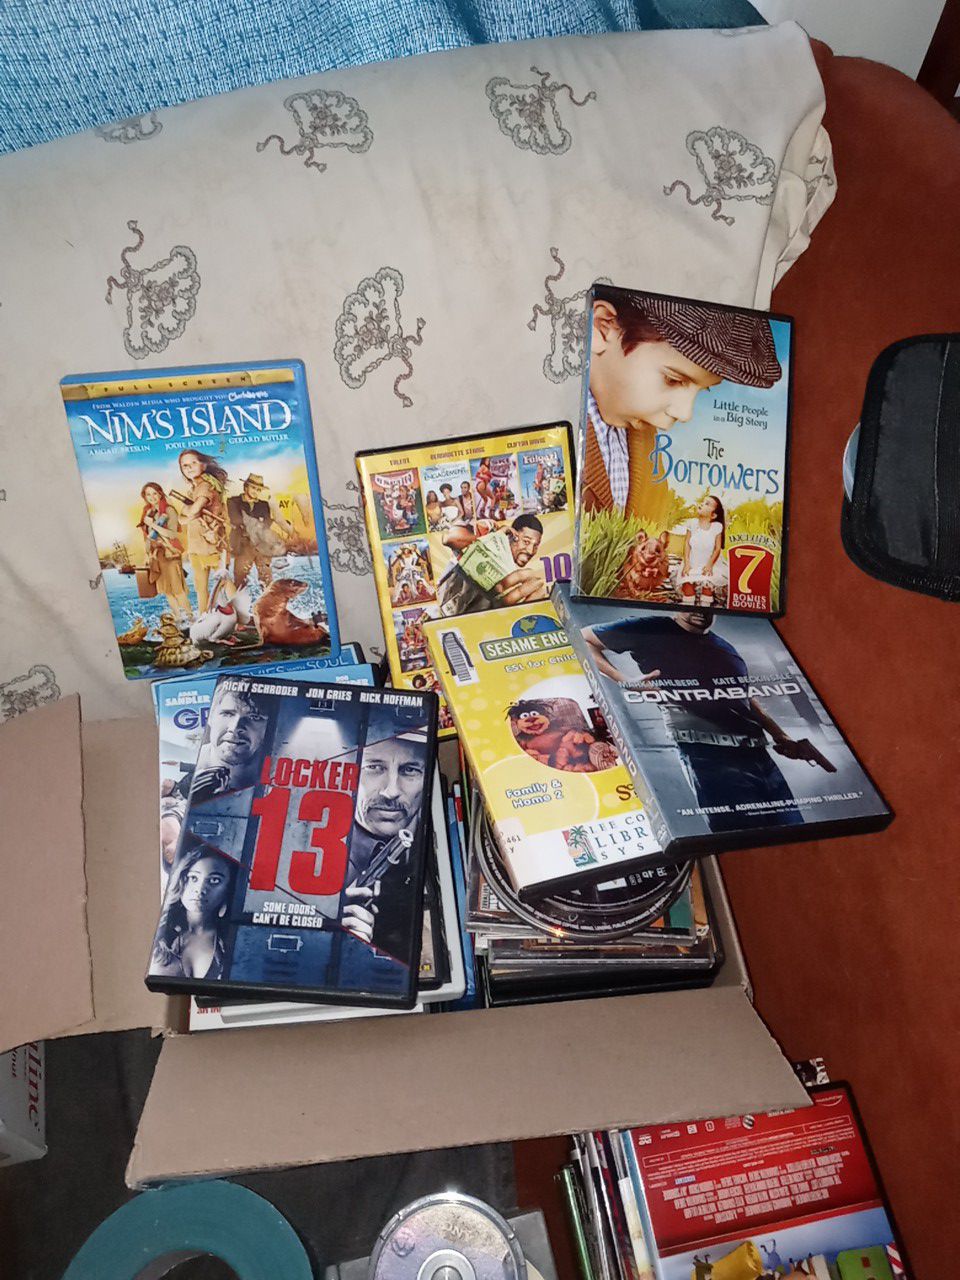 Dvd's , Blue Ray disks PC games